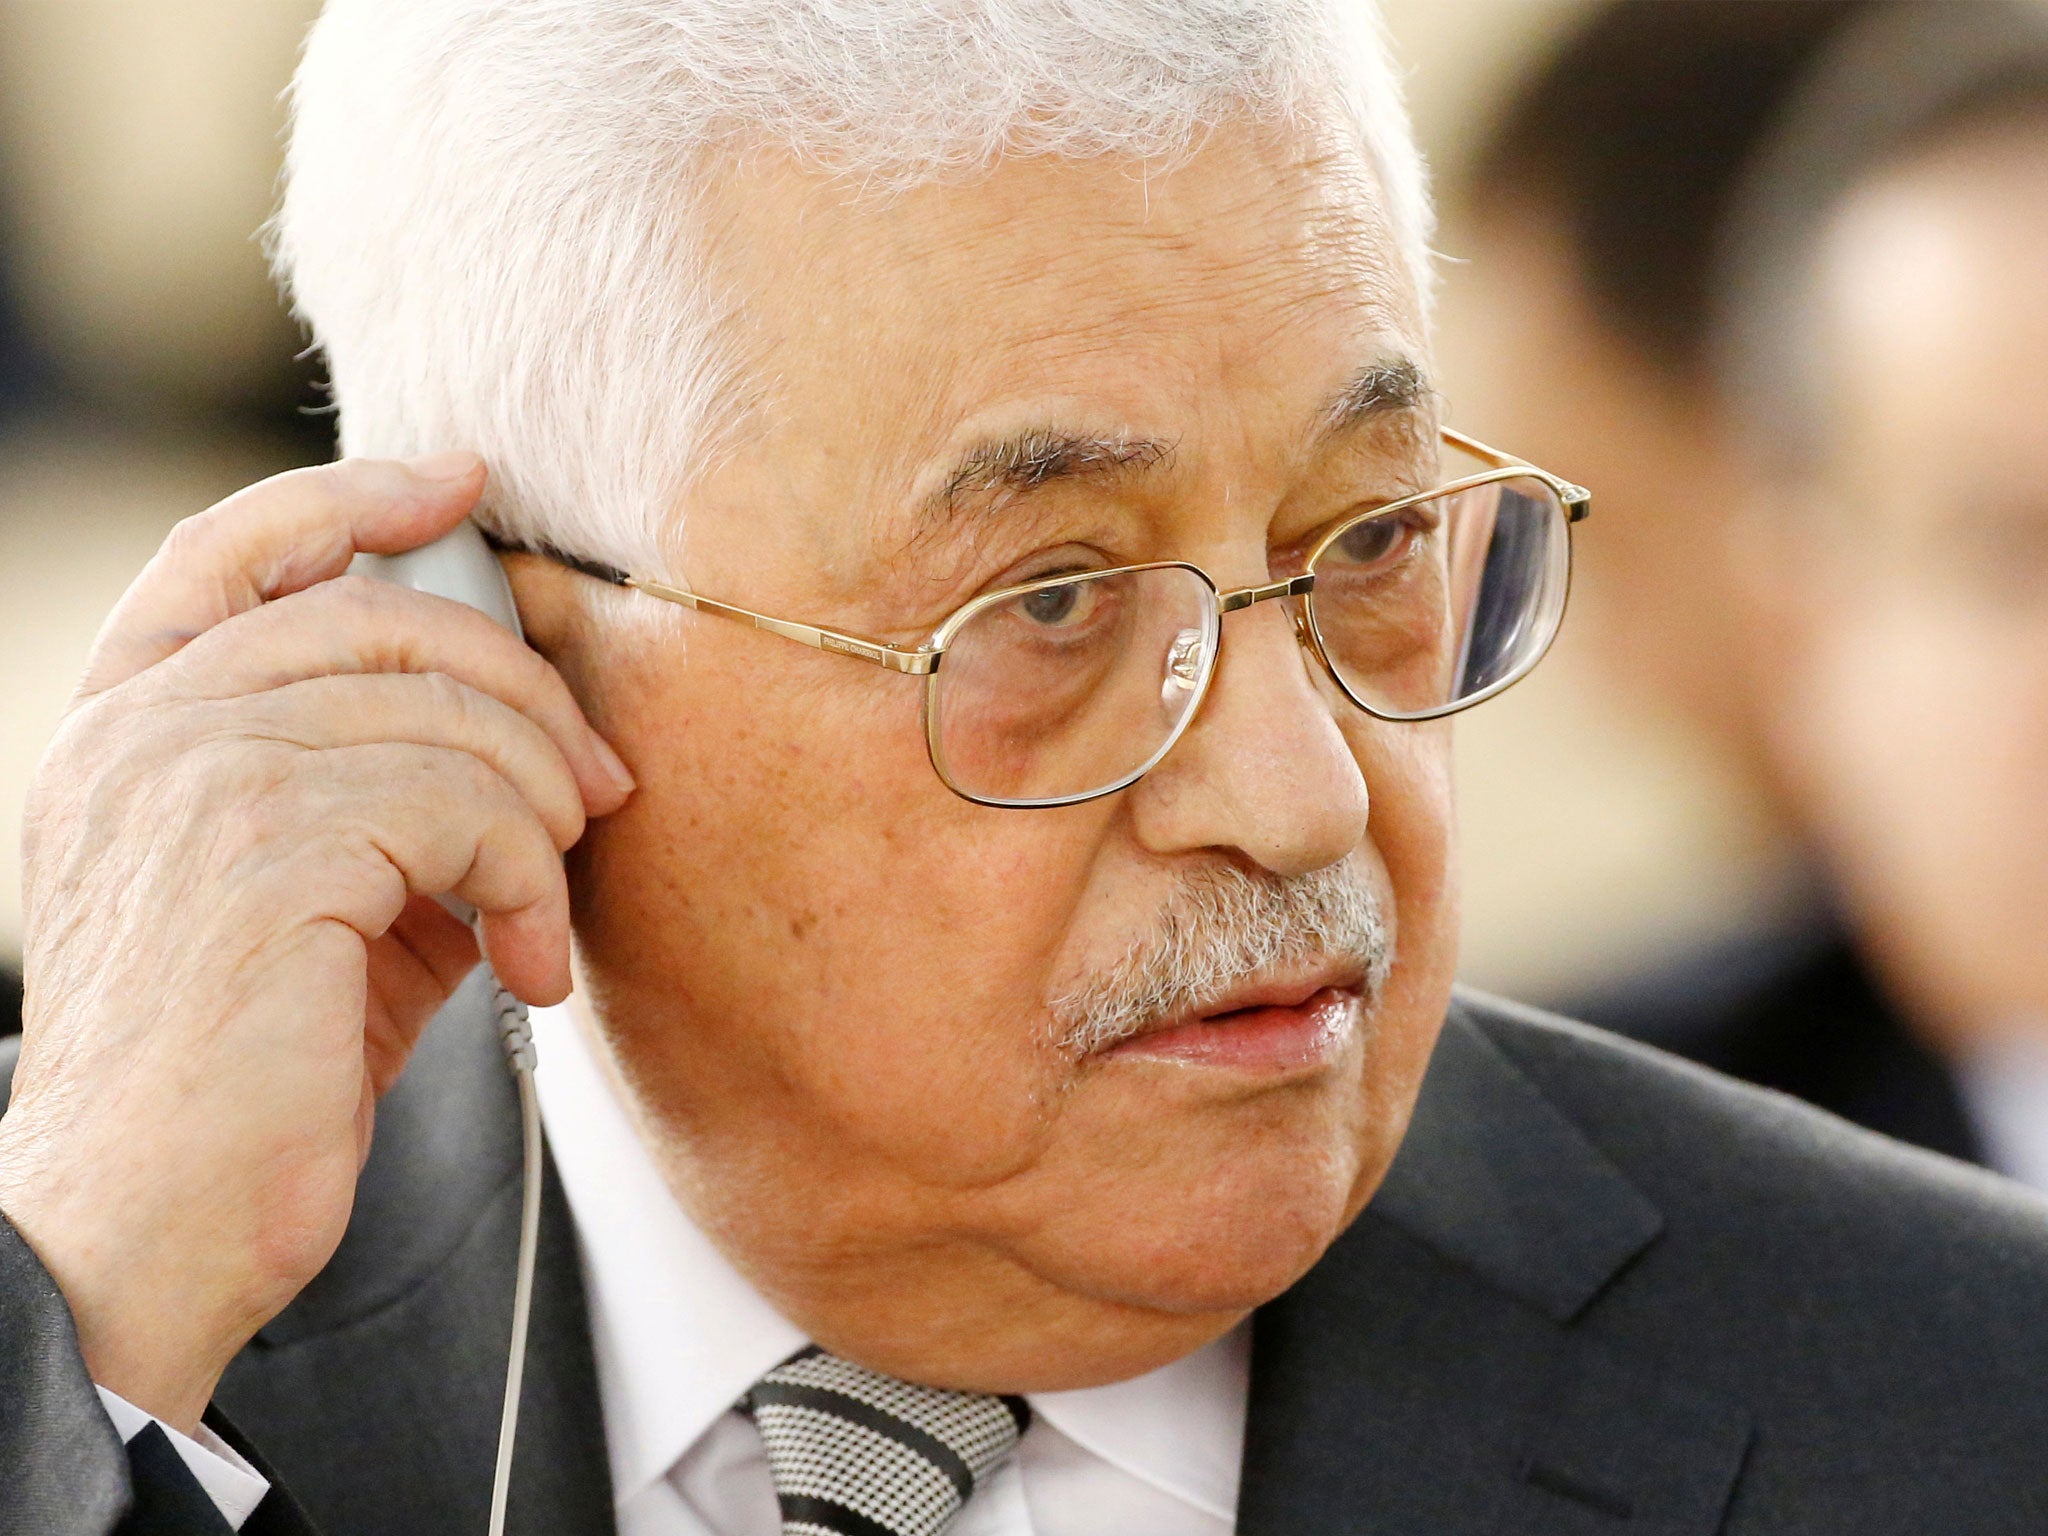 Palestinian President Mahmoud Abbas will visit the White House 'soon'